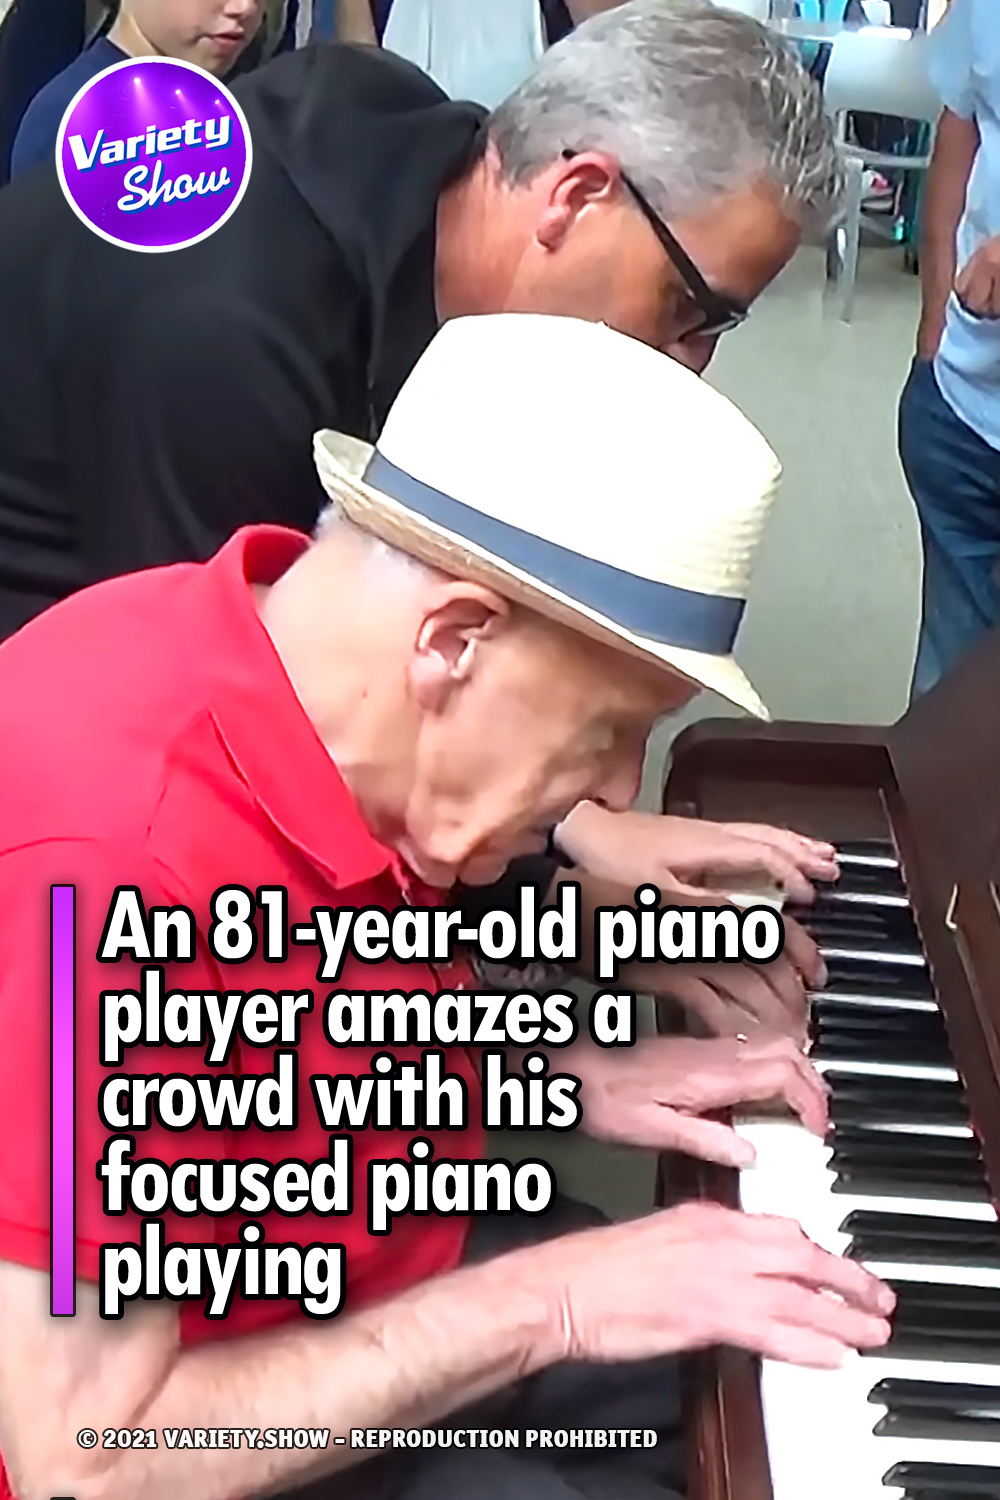 An 81-year-old piano player amazes a crowd with his focused piano playing